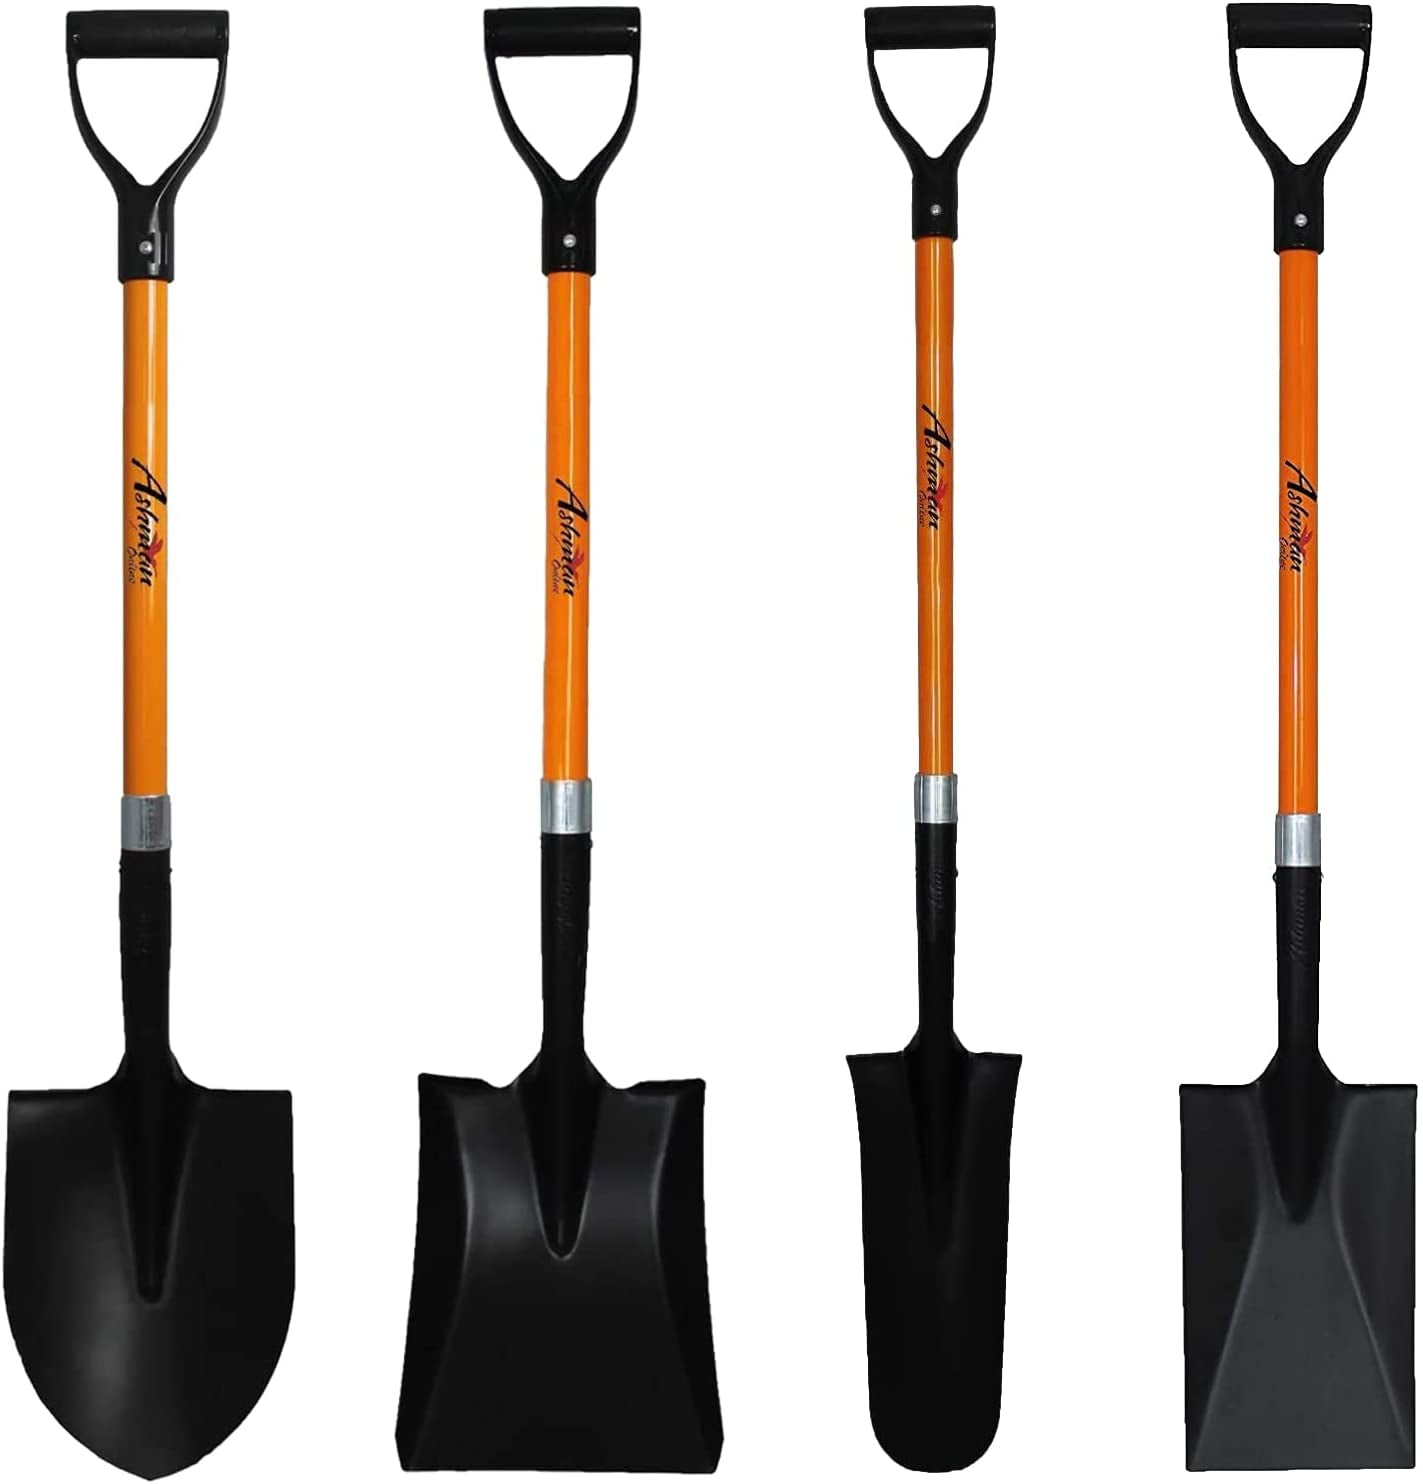 The Round Shovel has a D Handle Grip with 41 Inches Shaft Ashman Round Shovel 